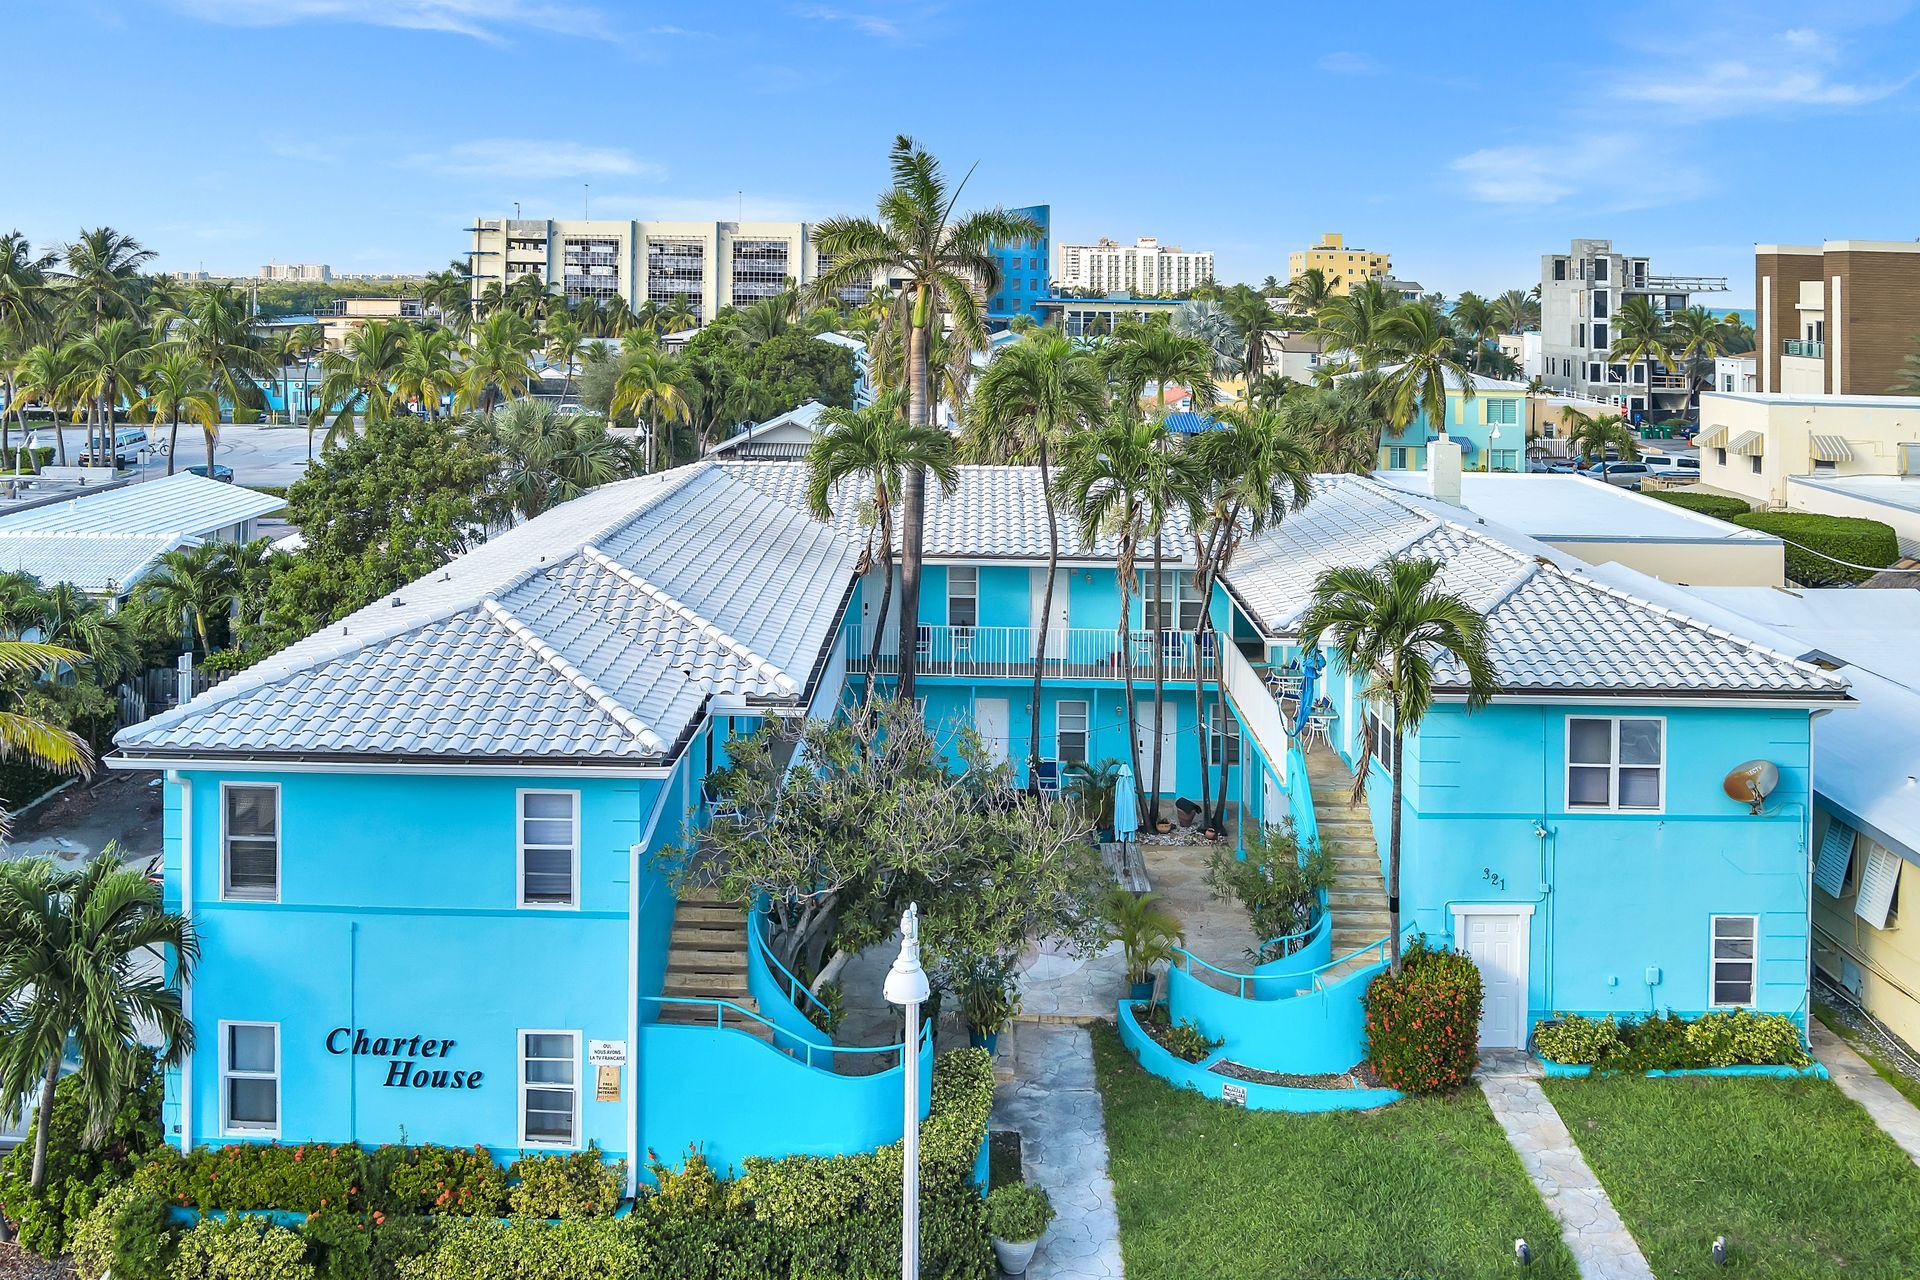 Charter House Hotel in Hollywood Beach, FL